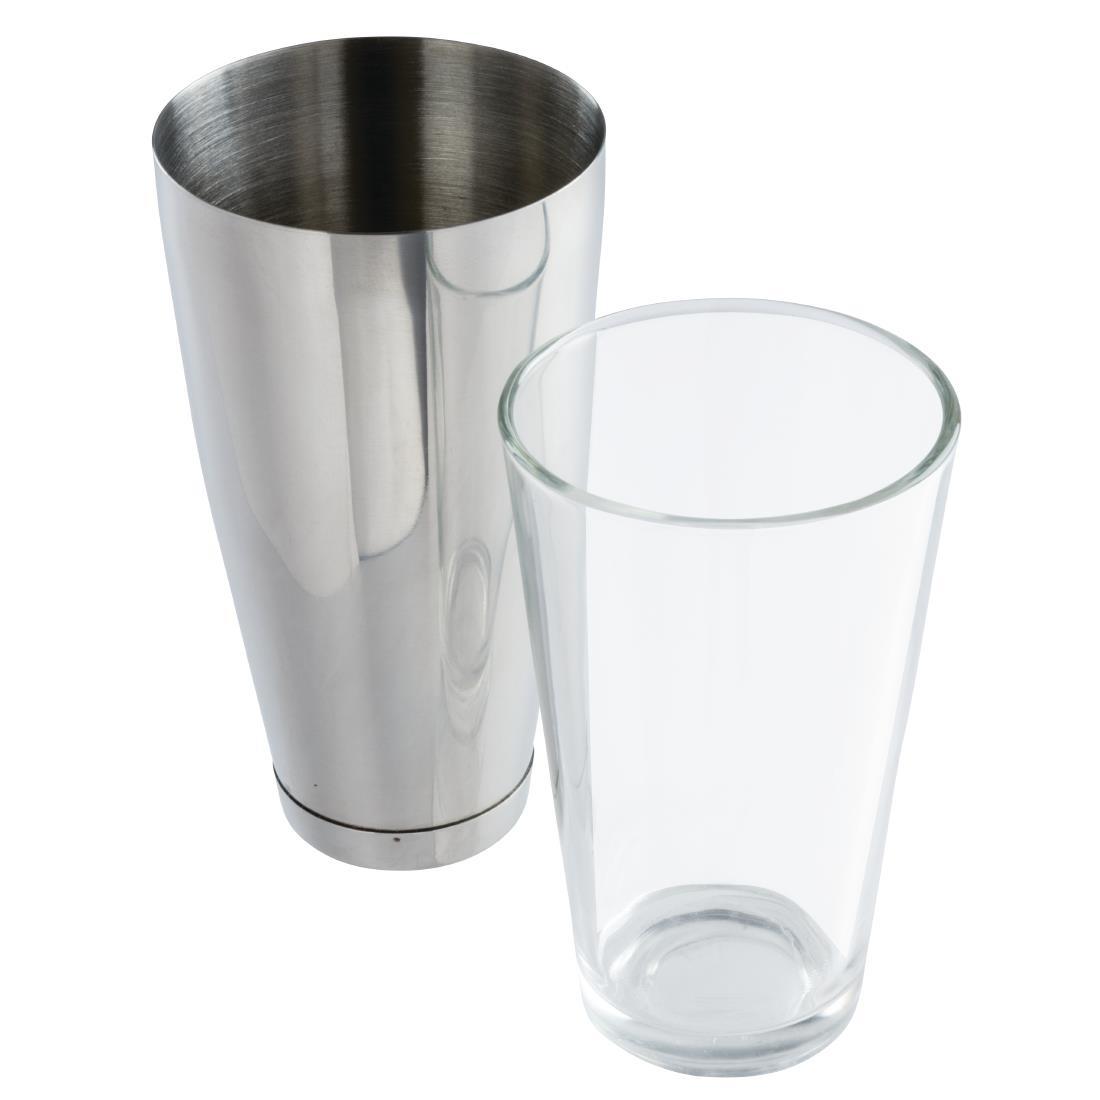 APS Boston Shaker and Glass - S766  - 1